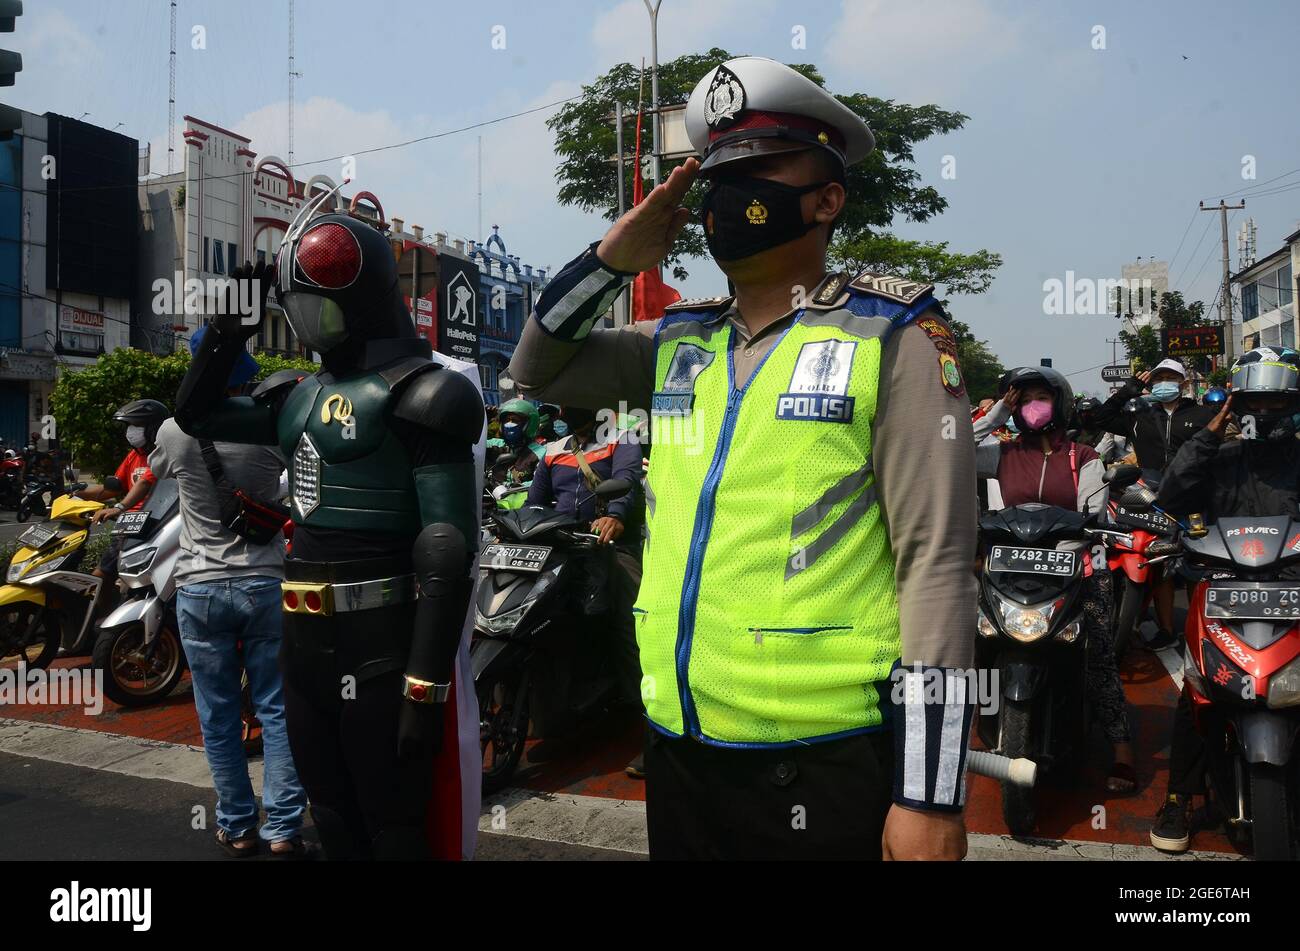 The 76th Indonesian Independence ceremony took place in some places, especially in Depok, West Java. Police and people who pass through the Juanda area, Margonda, Depok, were participating in the ceremony. (Photo by Cahya Nugraha/Pacific Press) Stock Photo